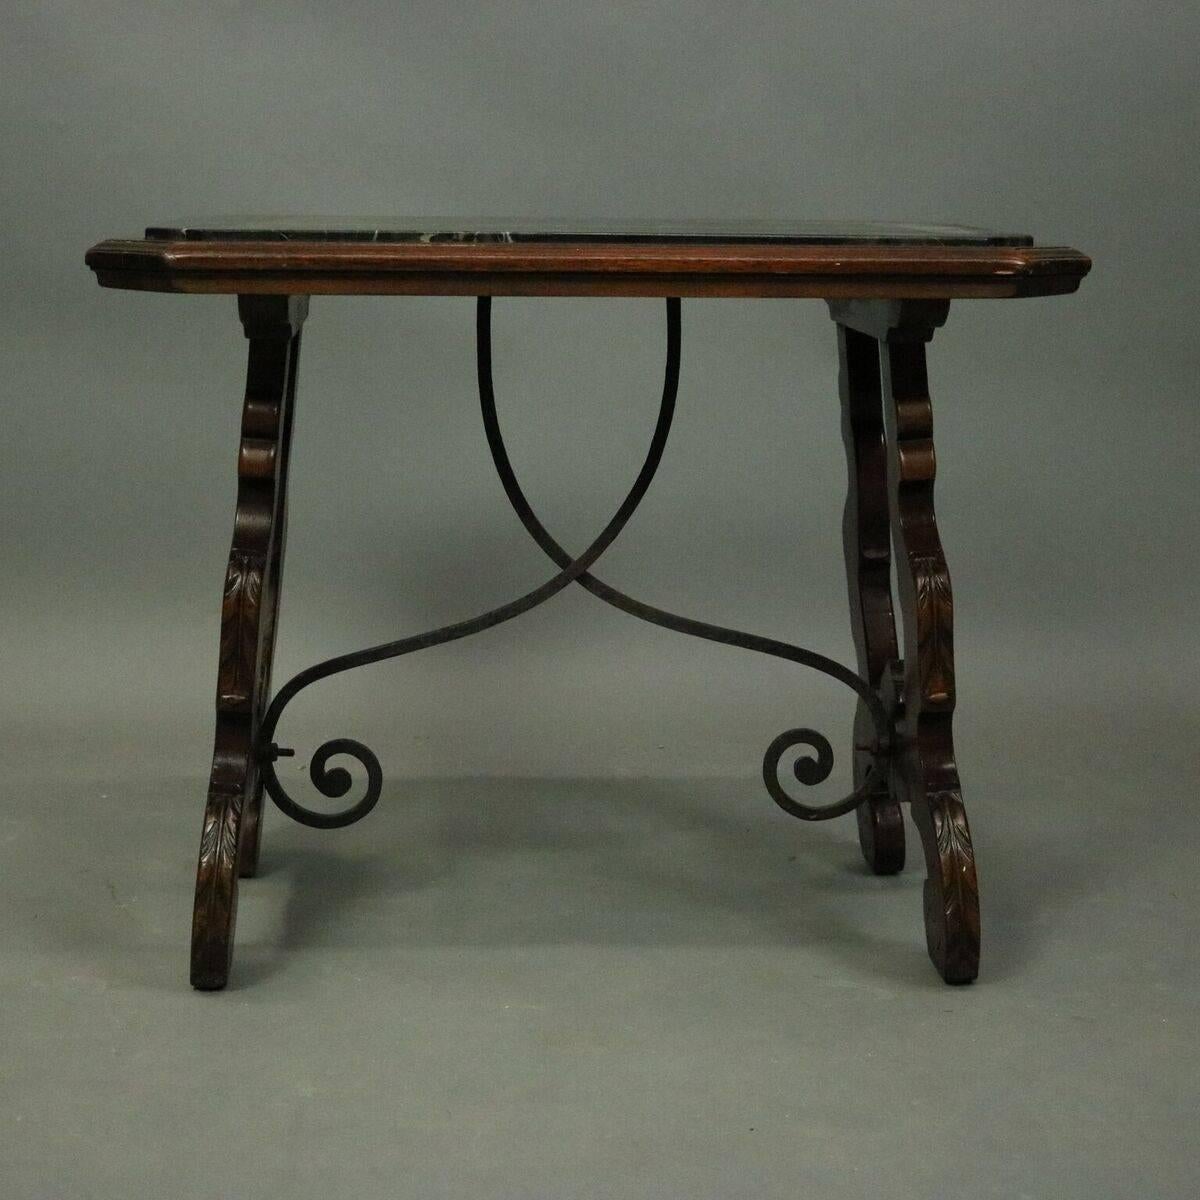 Vintage Continental coffee table features mahogany construction with acanthus carved trestle legs connected by scrolled wrought iron stretcher and picture frame black marble top, circa 1900

Measures: 20" H x 26" W x 17" D.